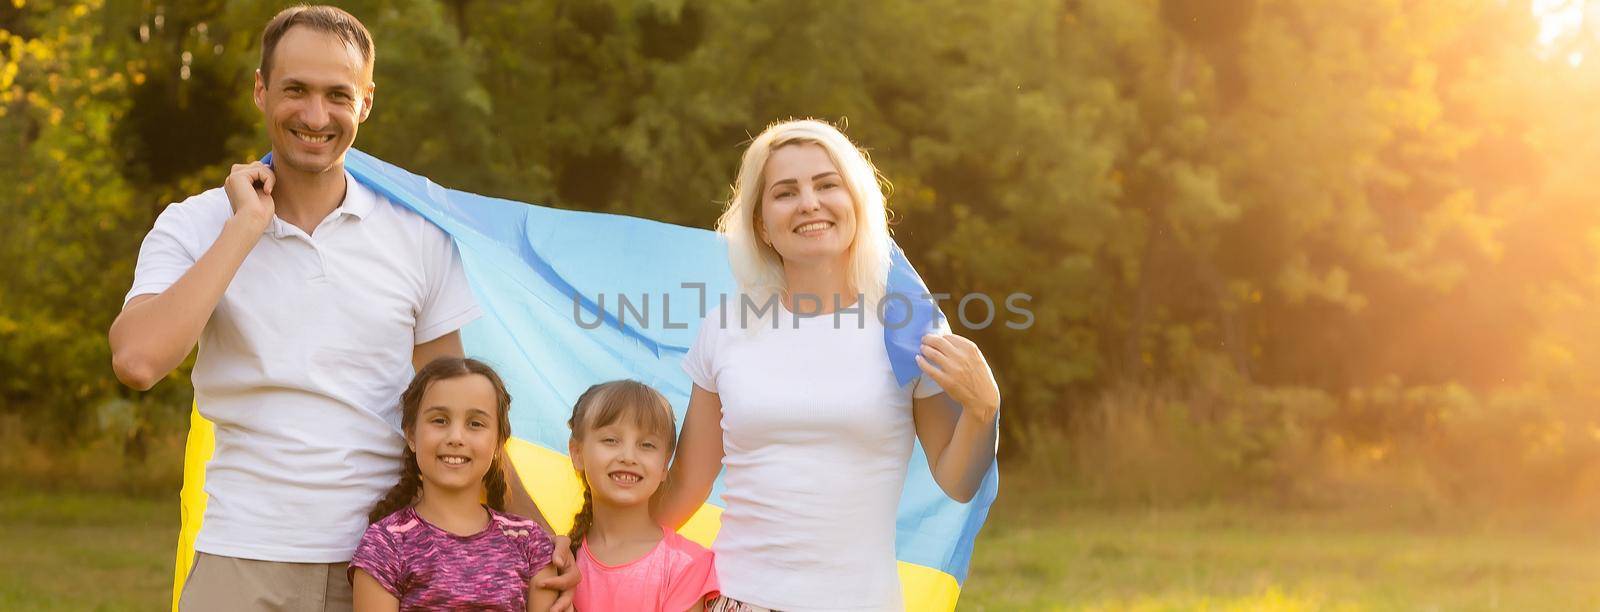 Happy family s with flag of Ukraine in field